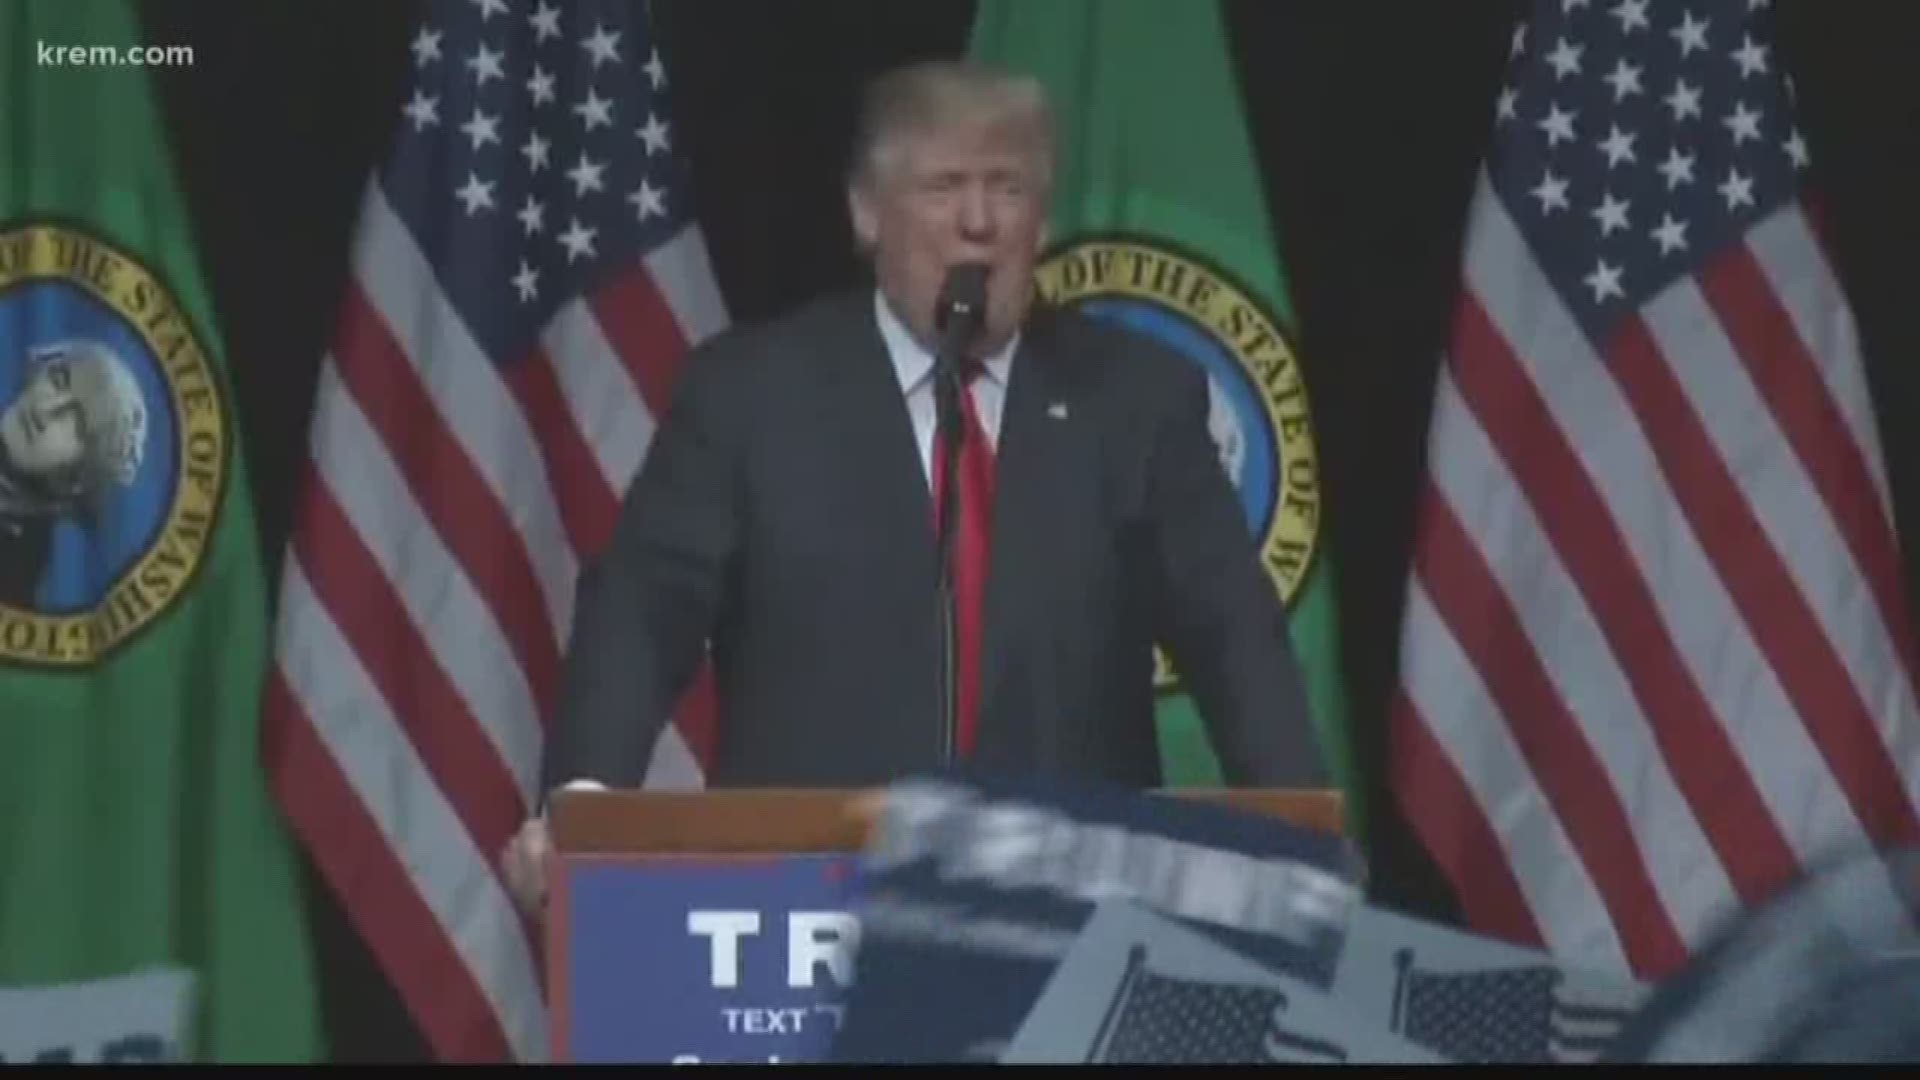 A new report shows President Donald Trump owes the city of Spokane more than $65,000. The costs cover security during his 2016 visit to Spokane while campaigning for president. As KREM 2's Alexa Block explains the President isn't the only politician who owes the city money.